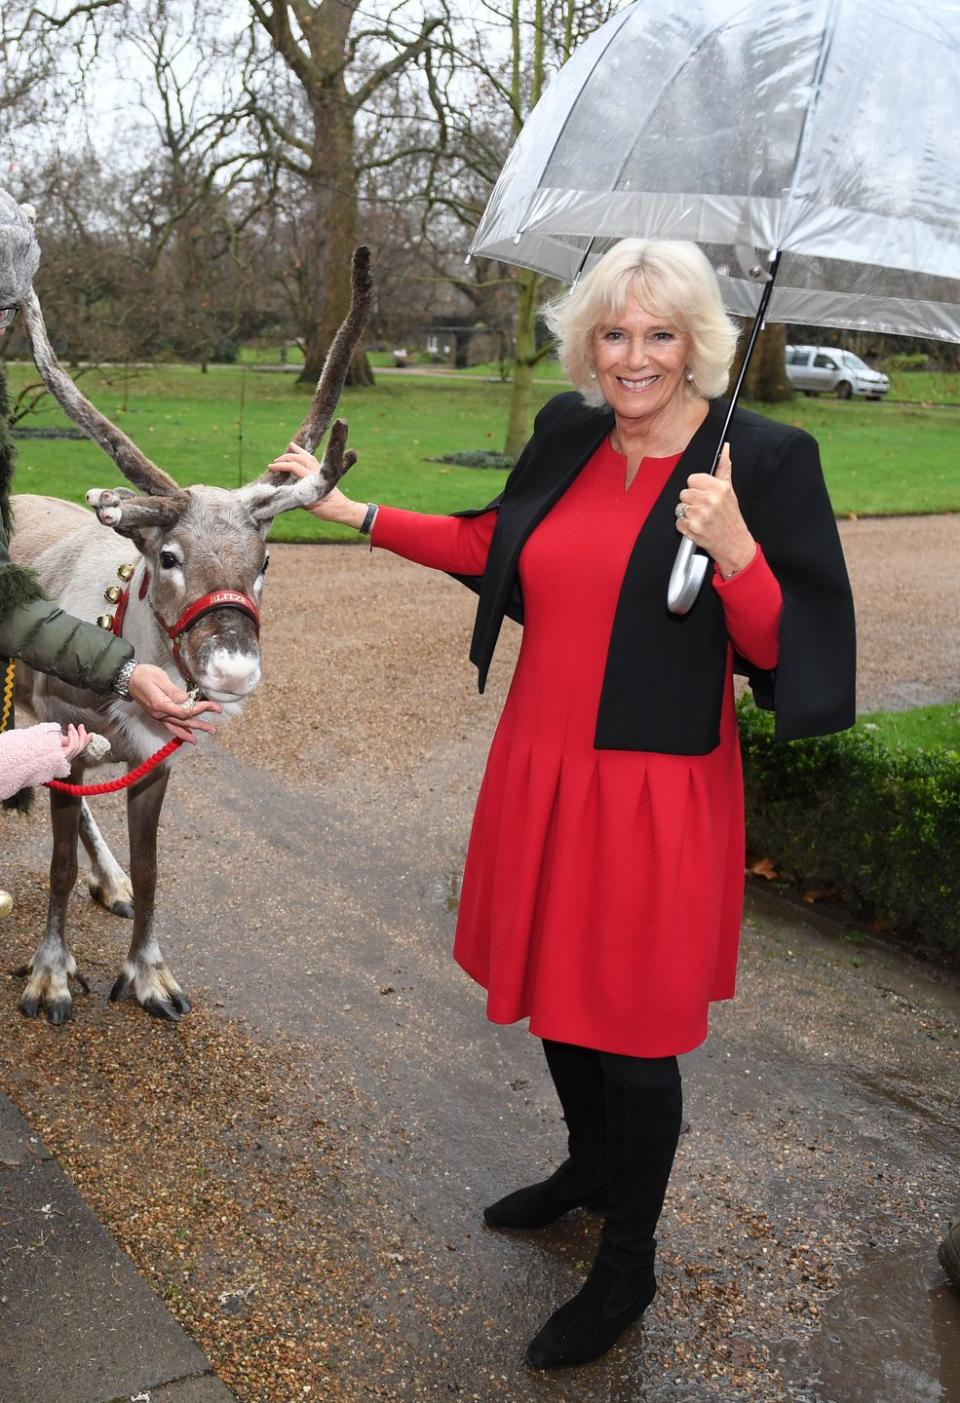 <p>Looking very festive in a red dress and black capelet, the Duchess hosted her annual children's Christmas party at Clarence House. The holiday lunch invites children who are seriously ill to enjoy activities including tree decorating and meeting reindeer. </p>